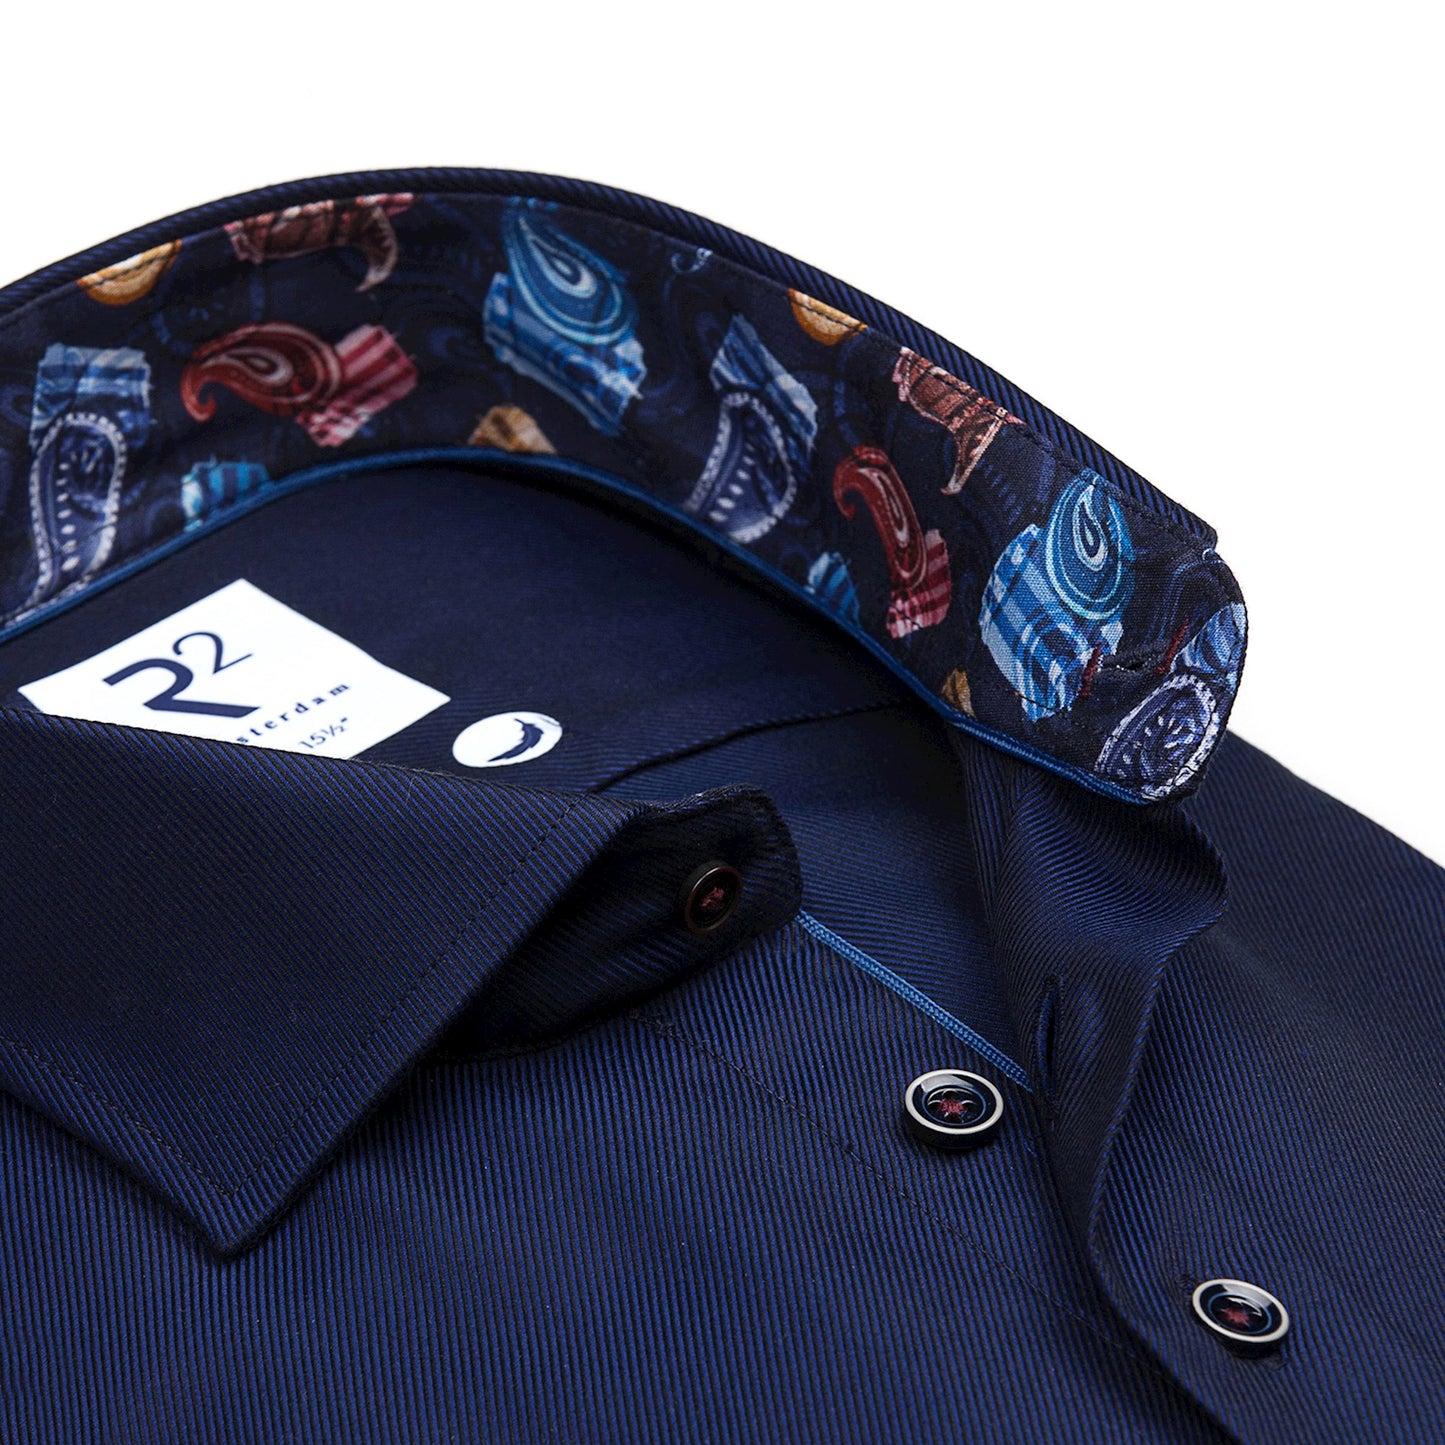 R2 Amsterdam Shirt with Contrast Details - Navy